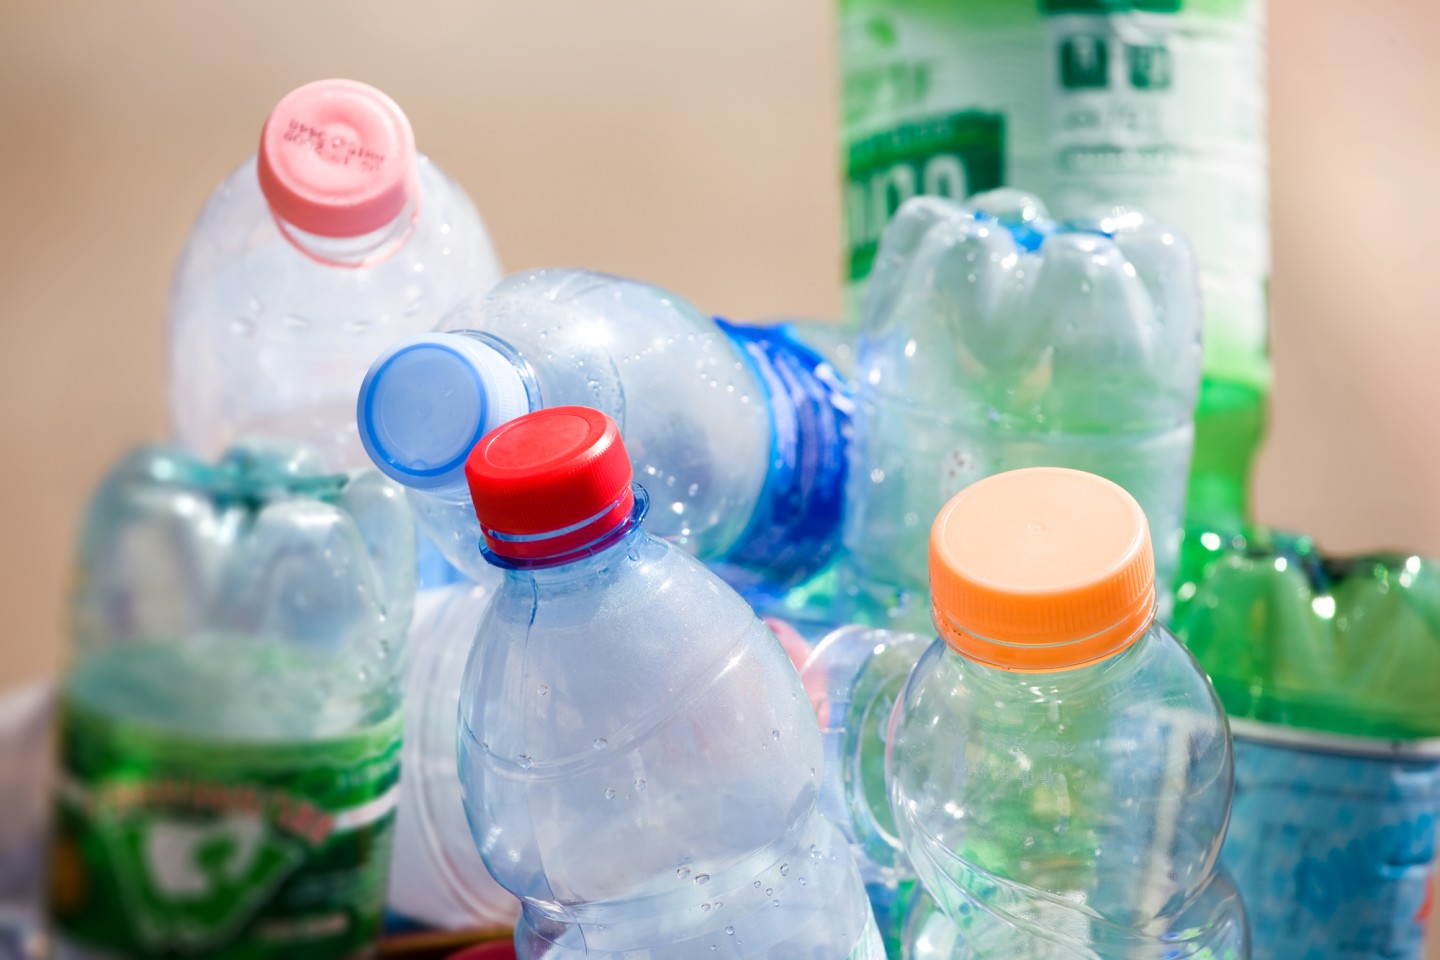 Plastic bottles are a huge source of waste, but scientists may have uncovered a way to put them to use in next-generation batteries